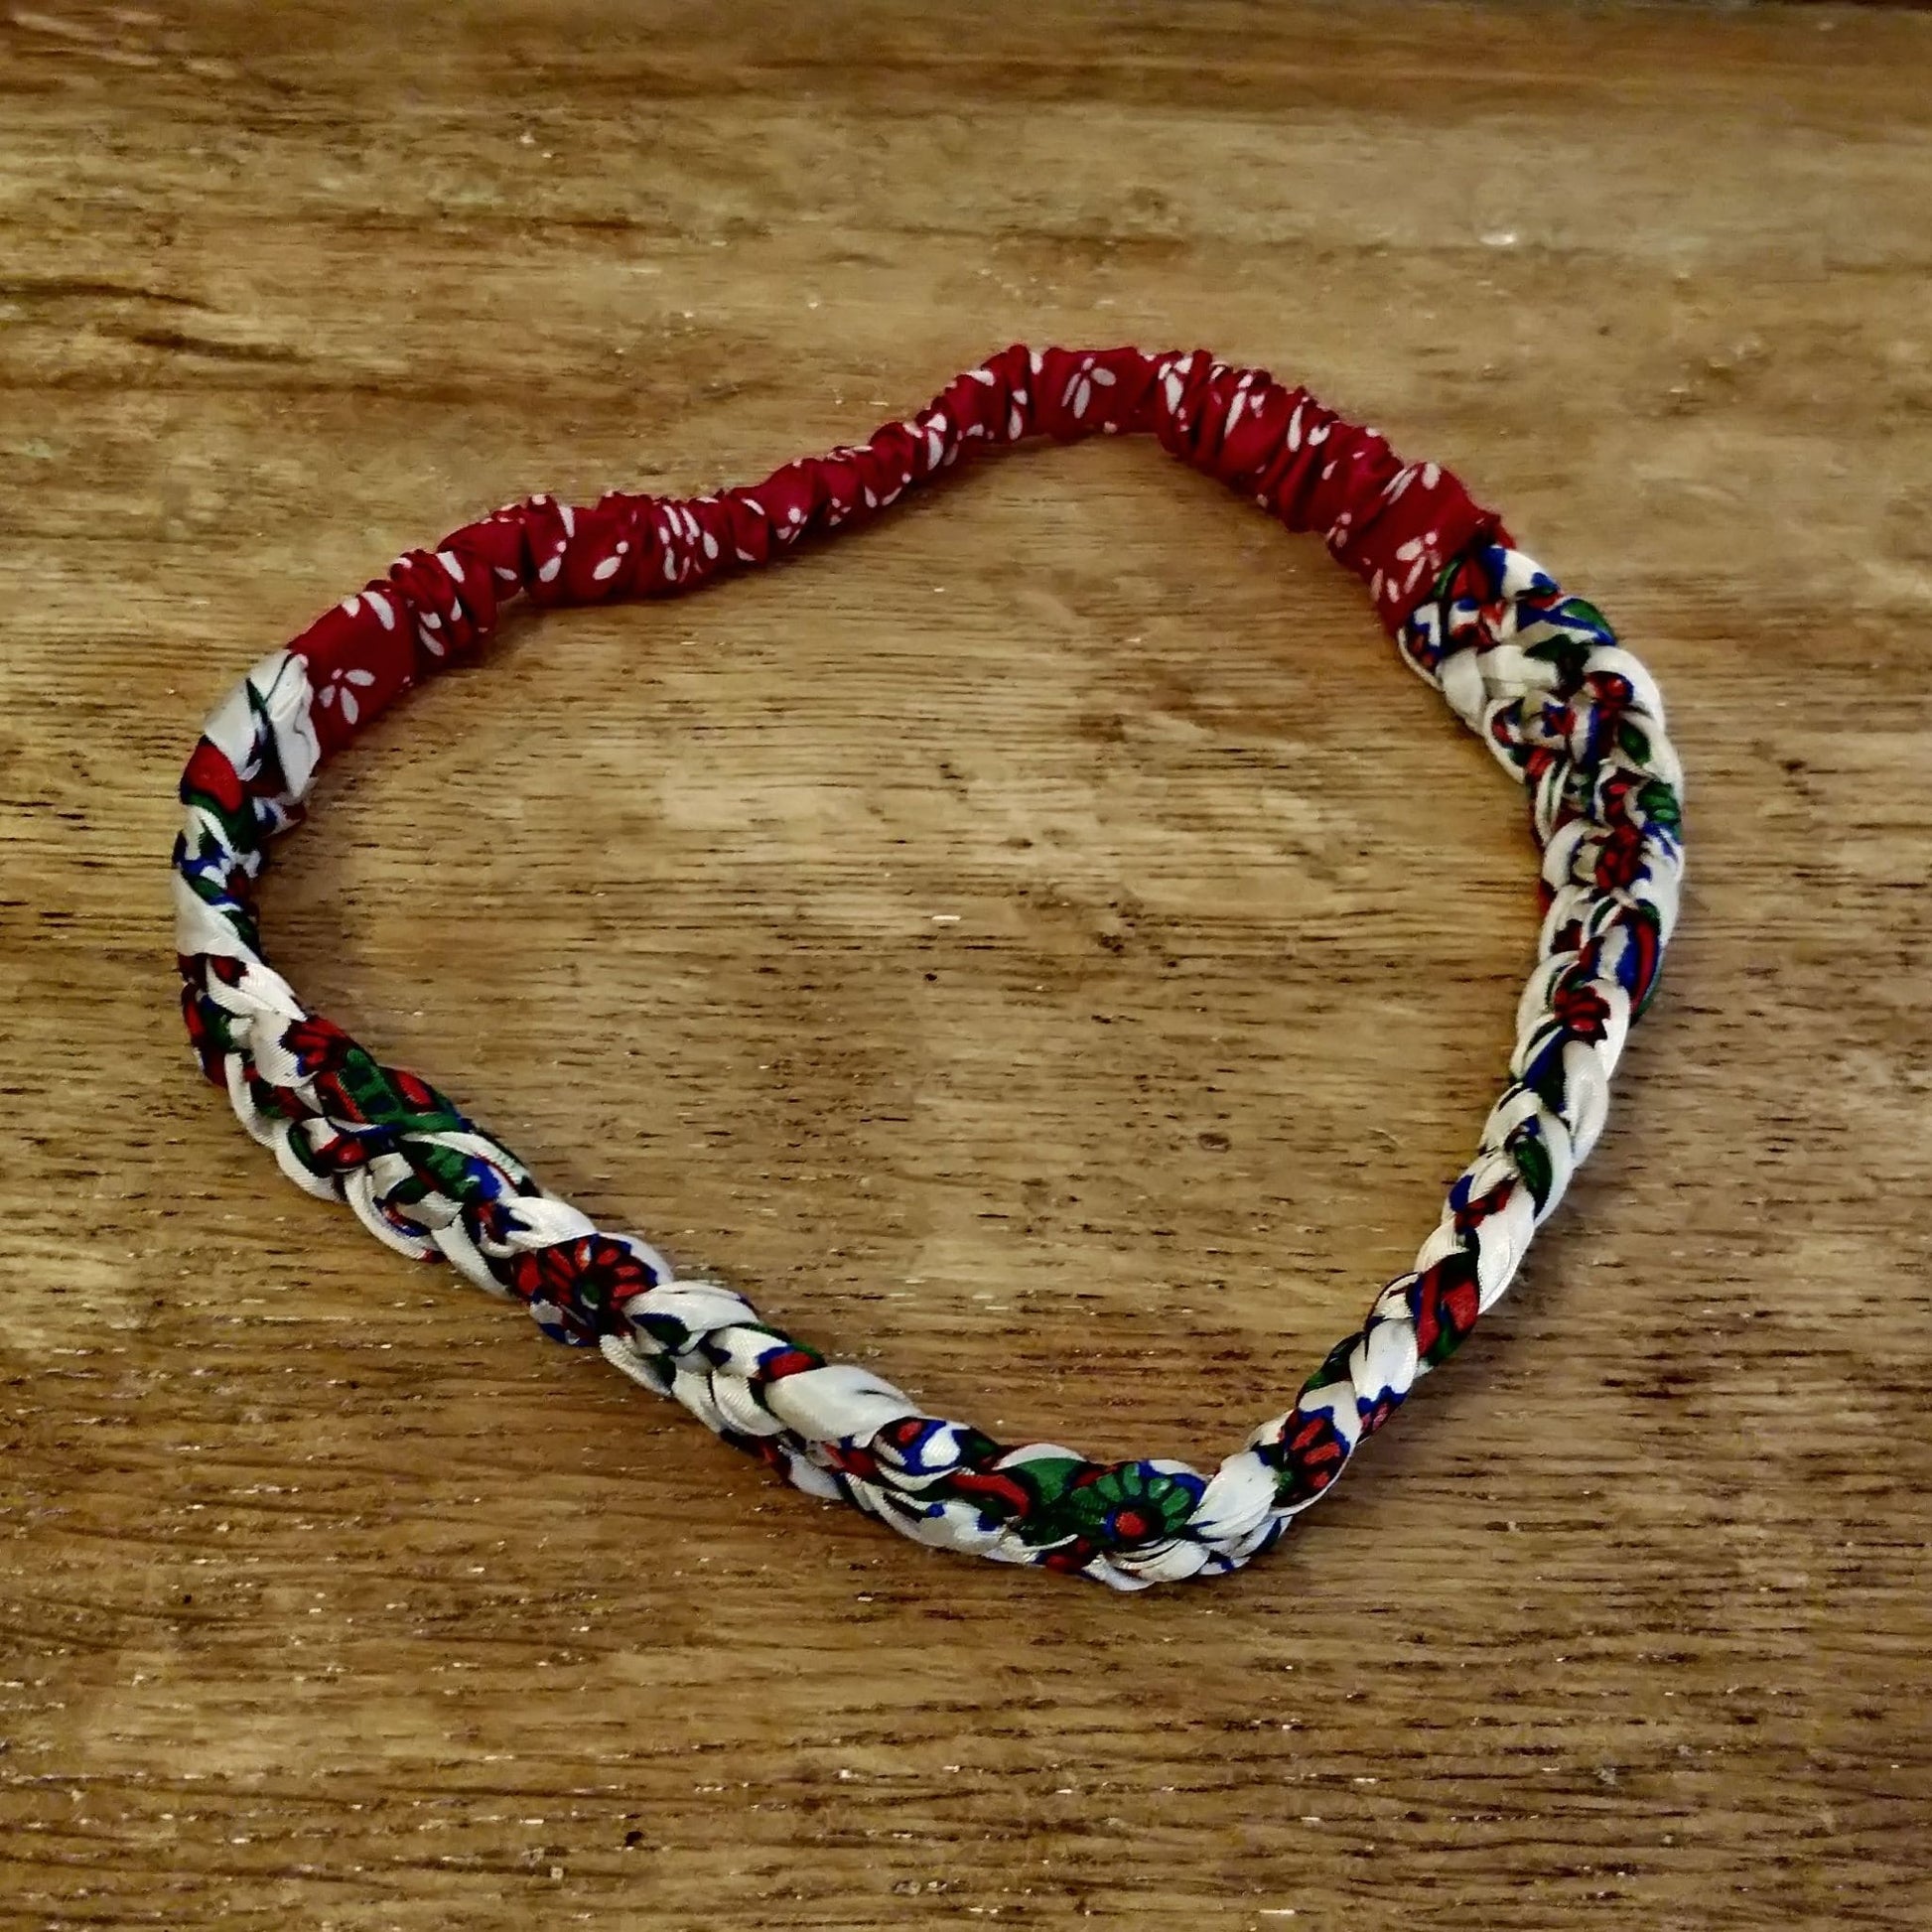 Braided Sari Headband Empowering Women in India - red hair band on wooden table